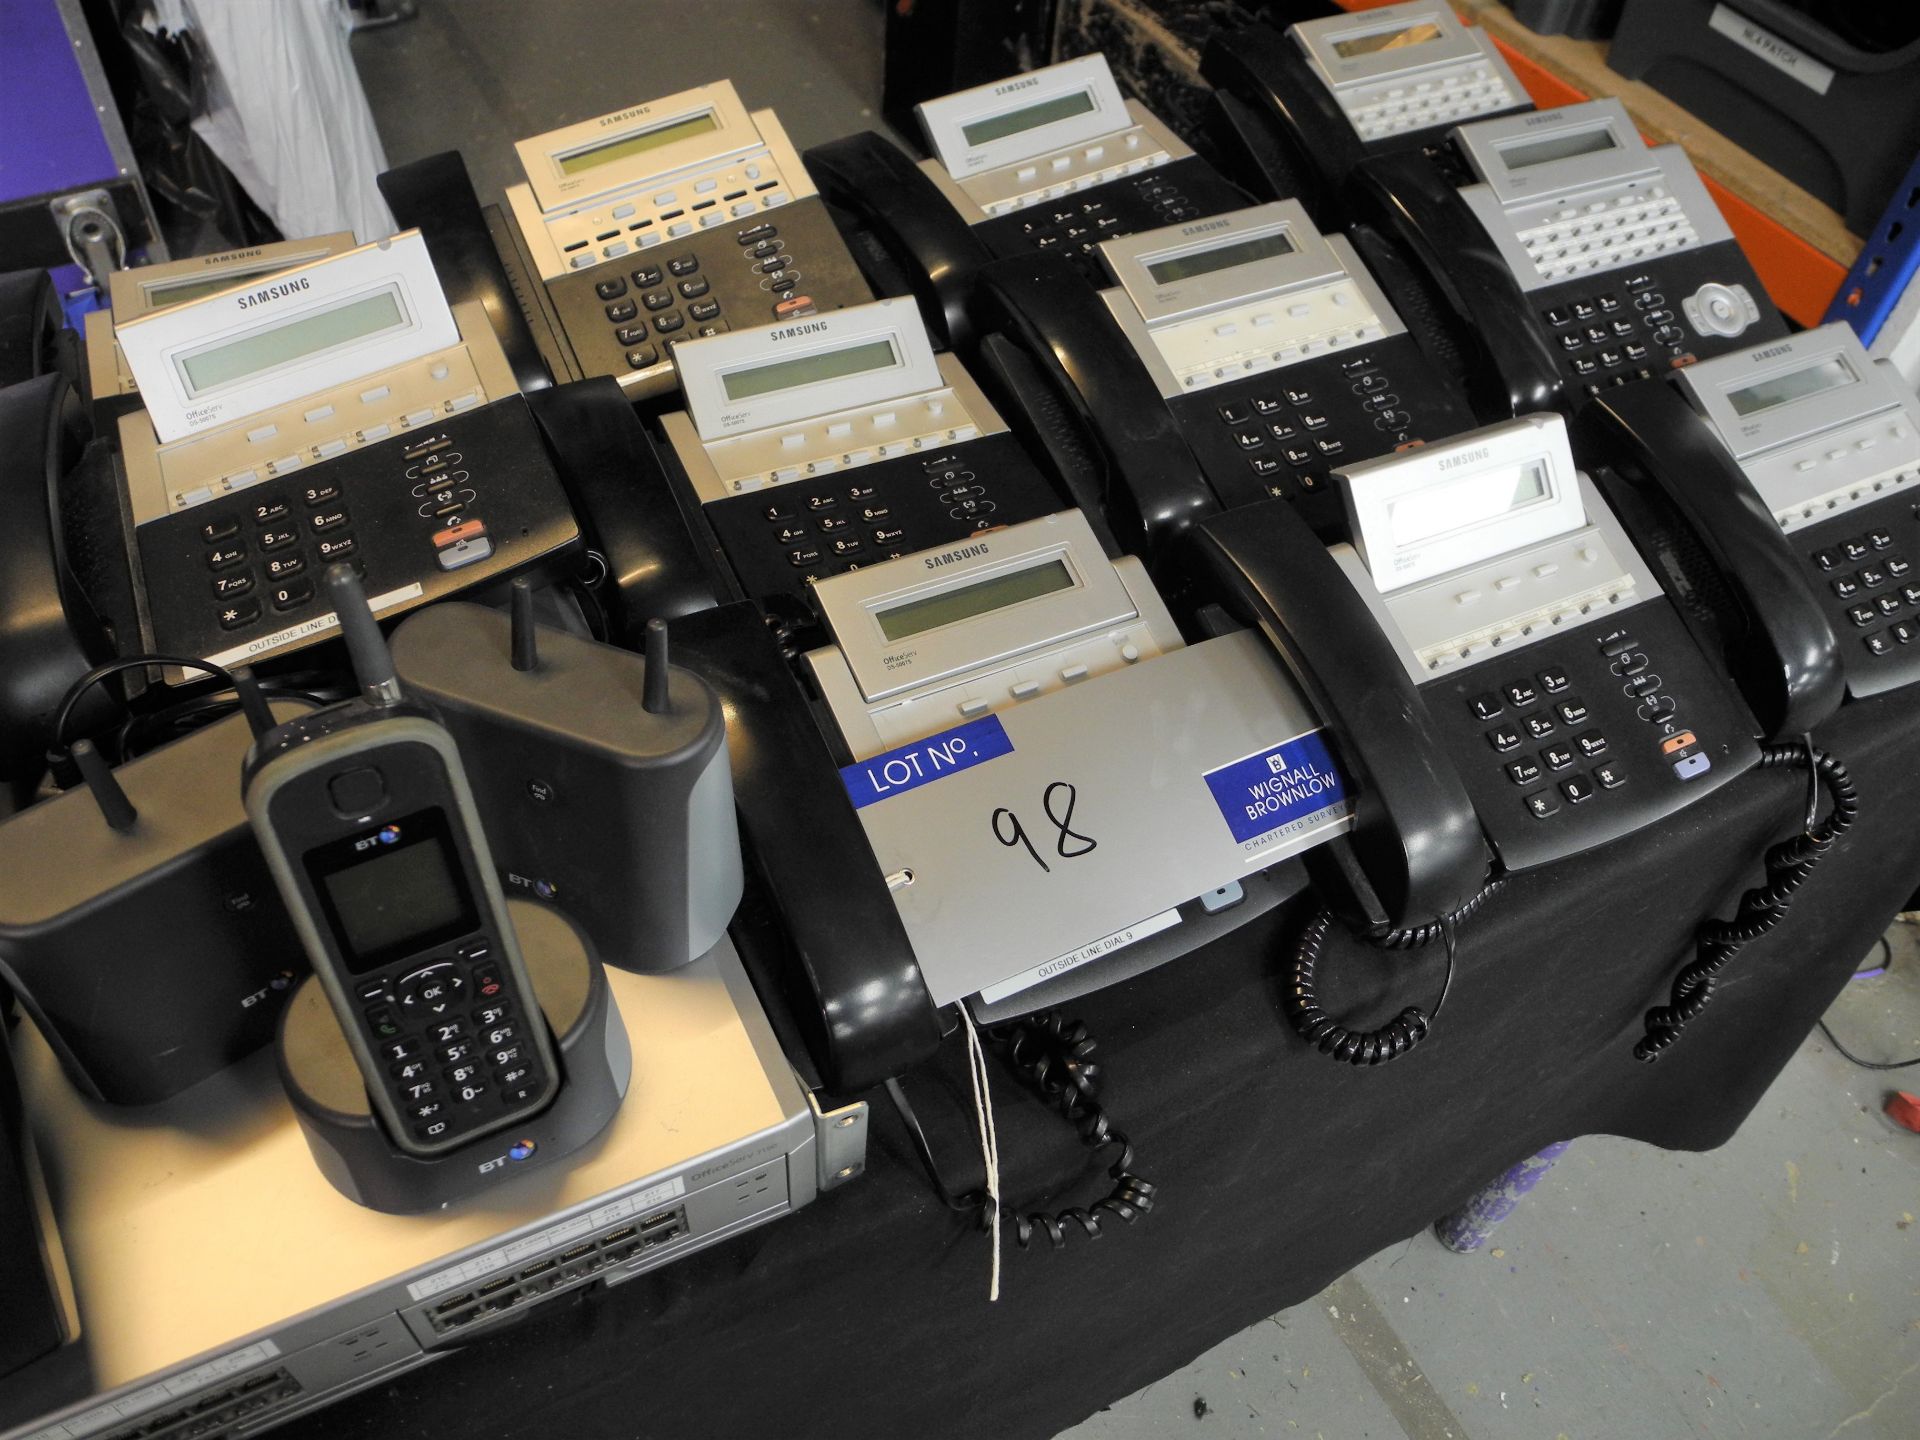 A Samsung Office Telephone System comprising Officeserv 7100 Network Server and Assorted Handsets, - Image 2 of 2